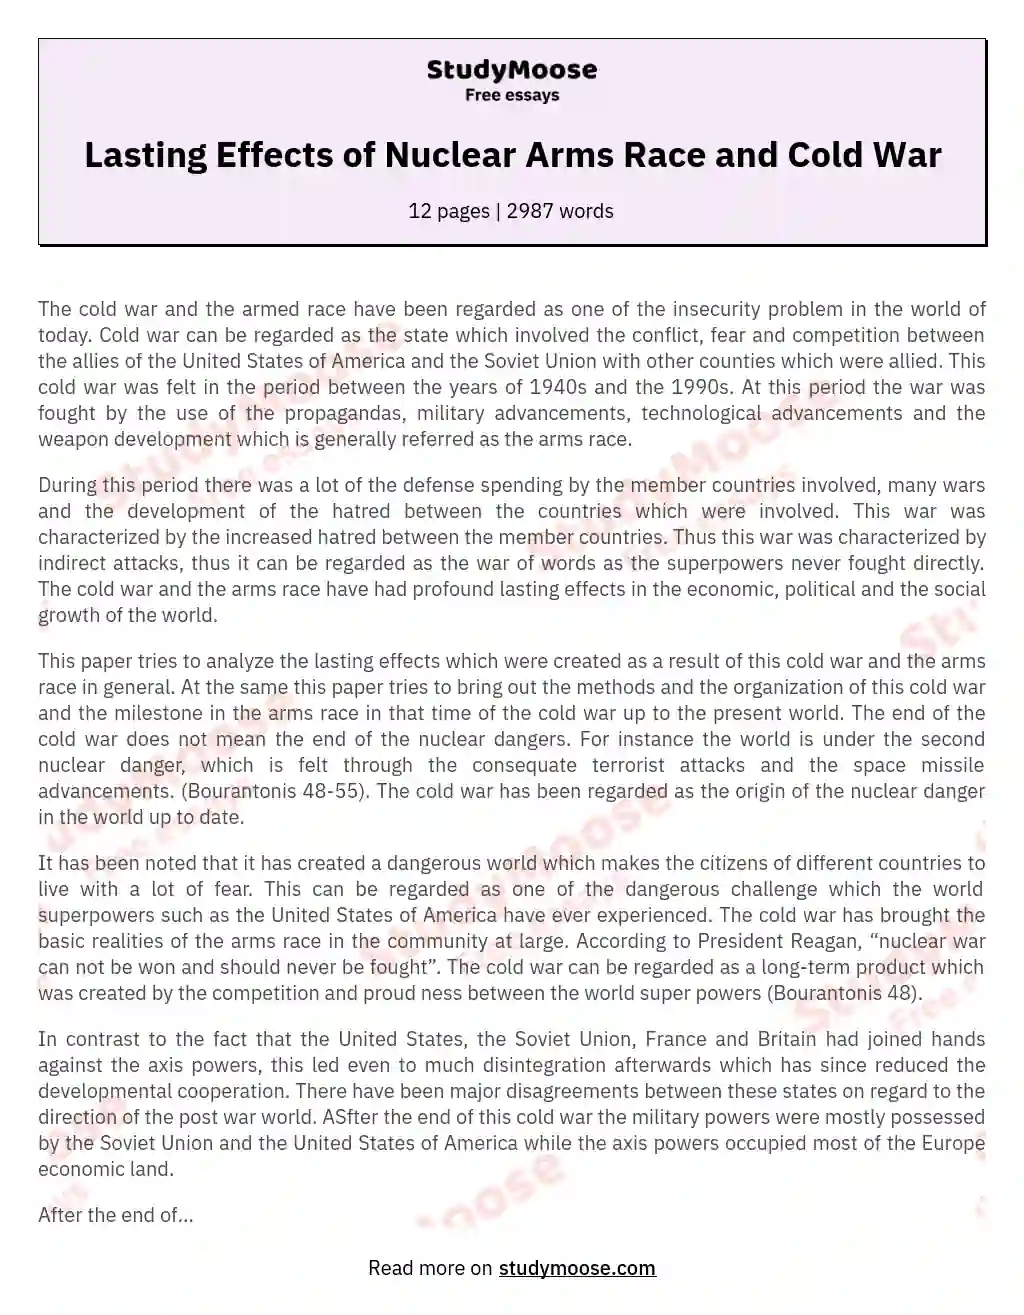 Lasting Effects of Nuclear Arms Race and Cold War